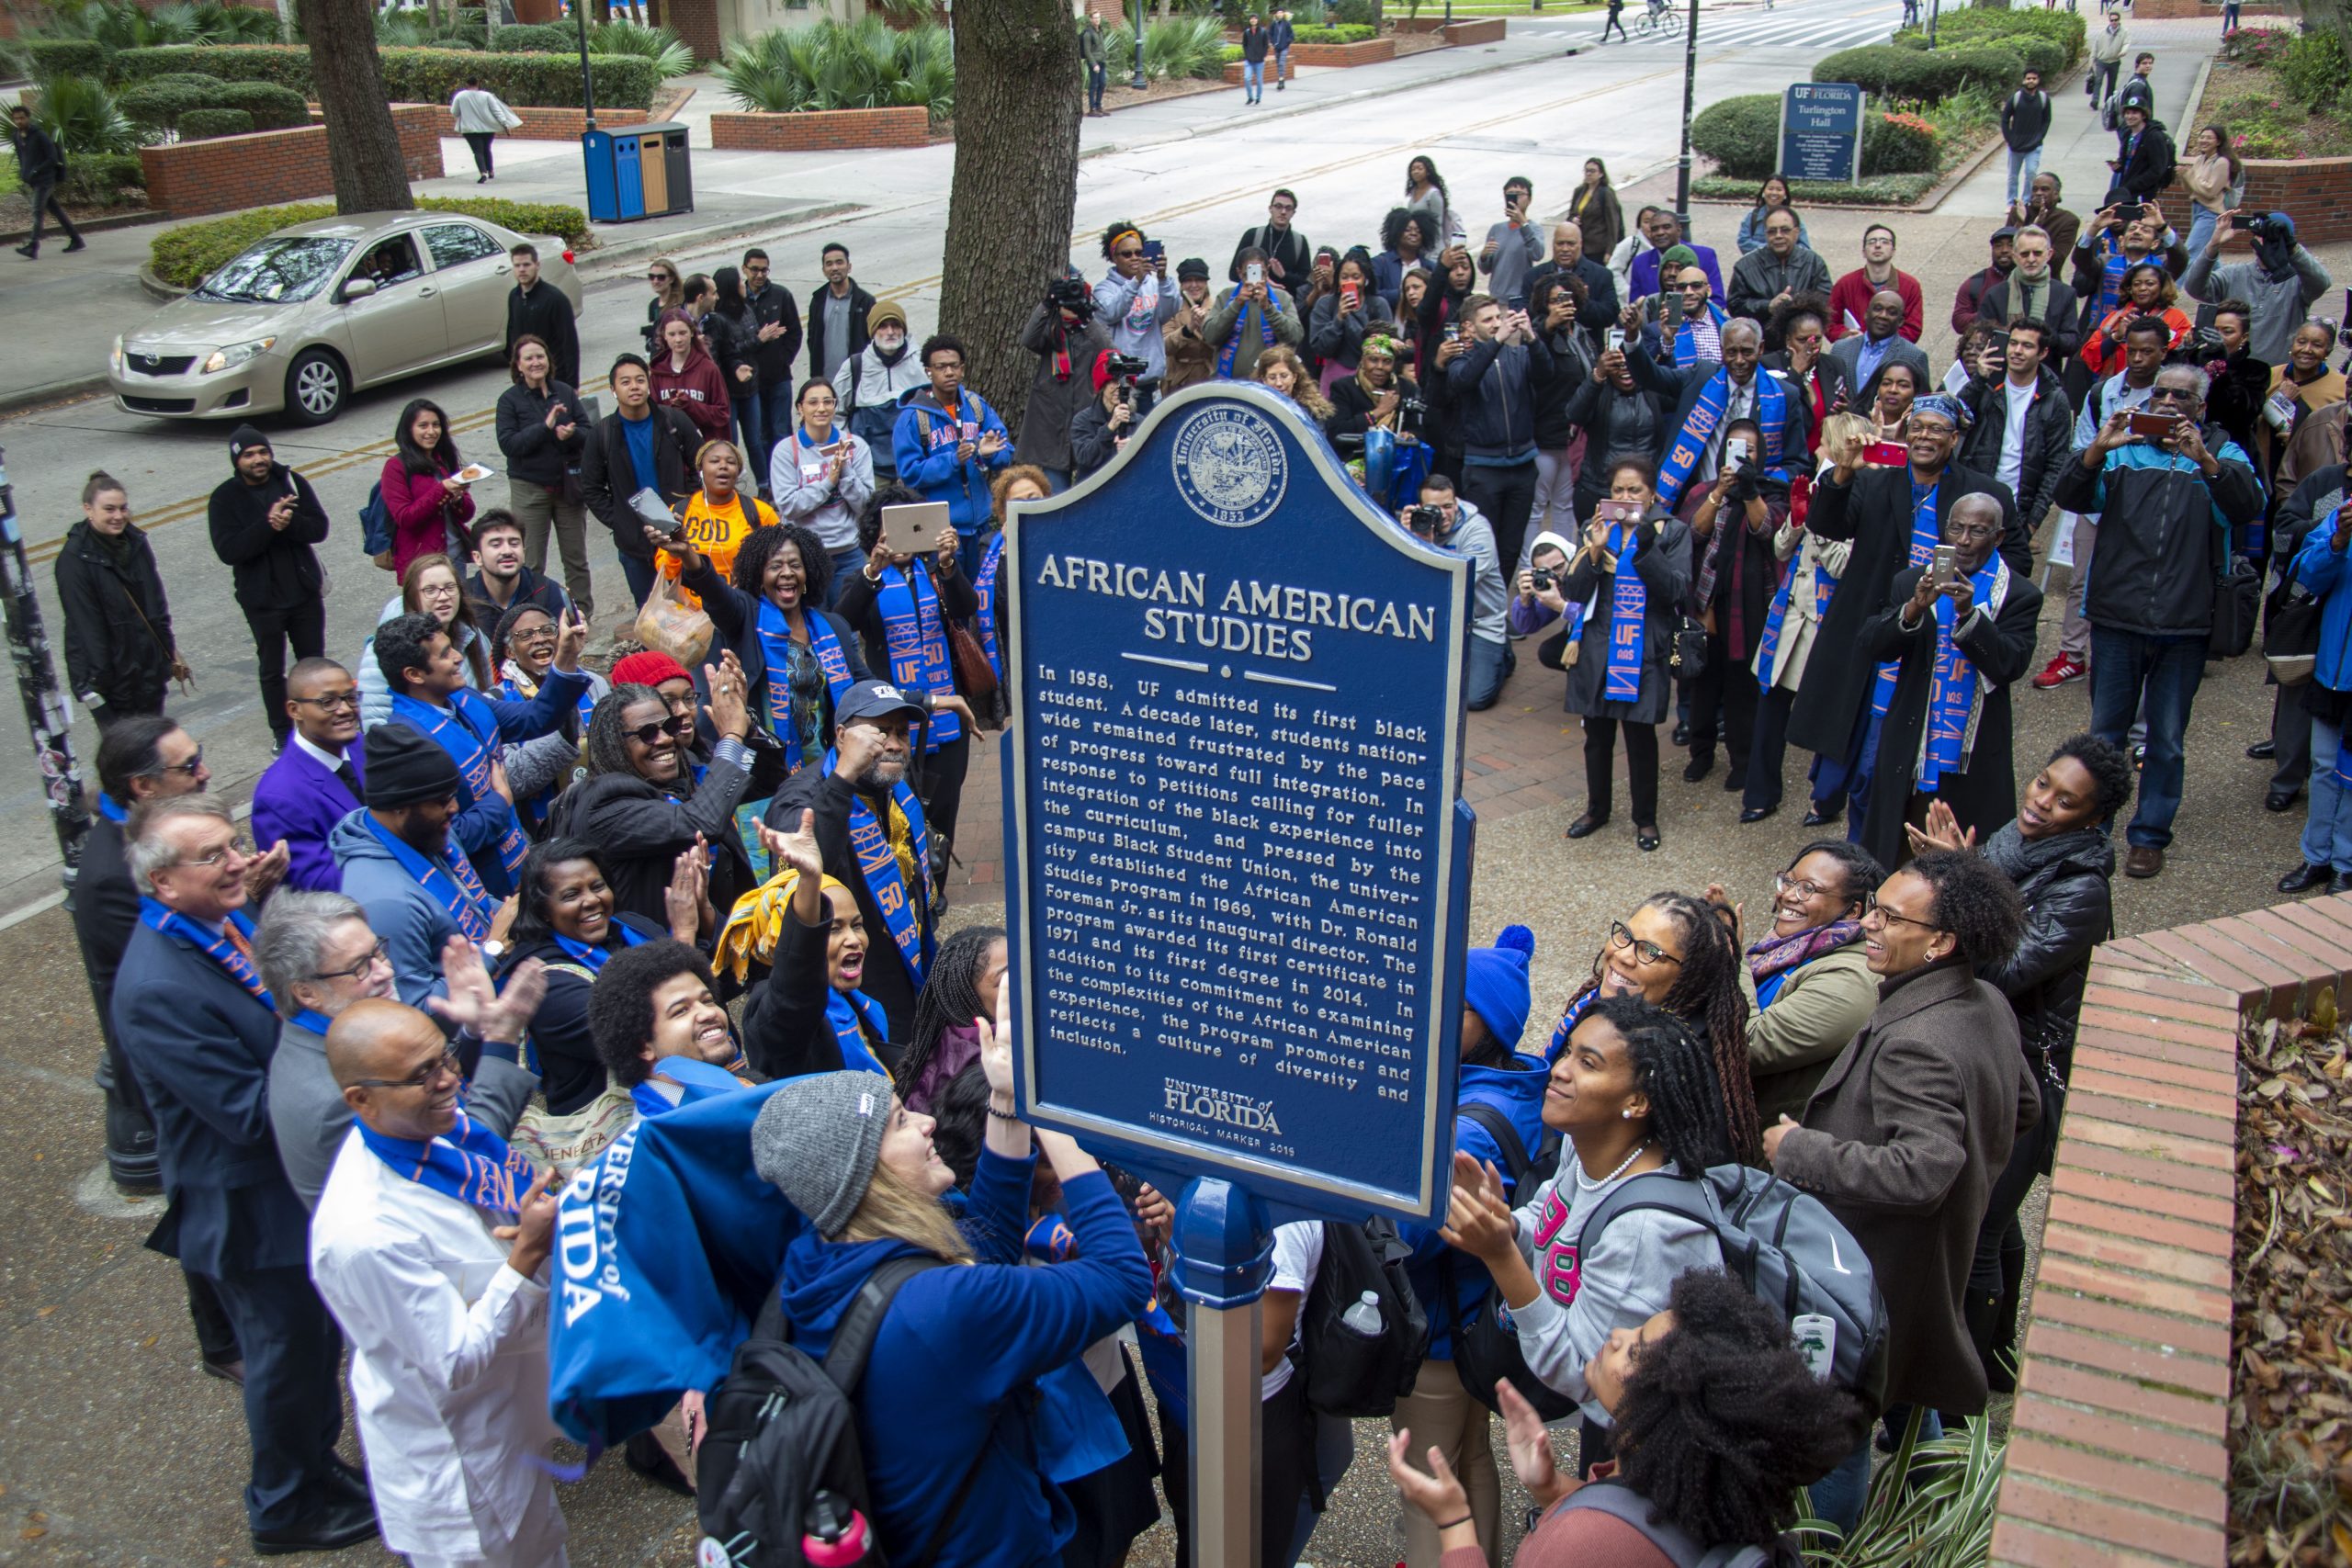 A large group surrounds a blue sign that reads “African American Studies,” followed by additional text. Much of the group is smiling and clapping.